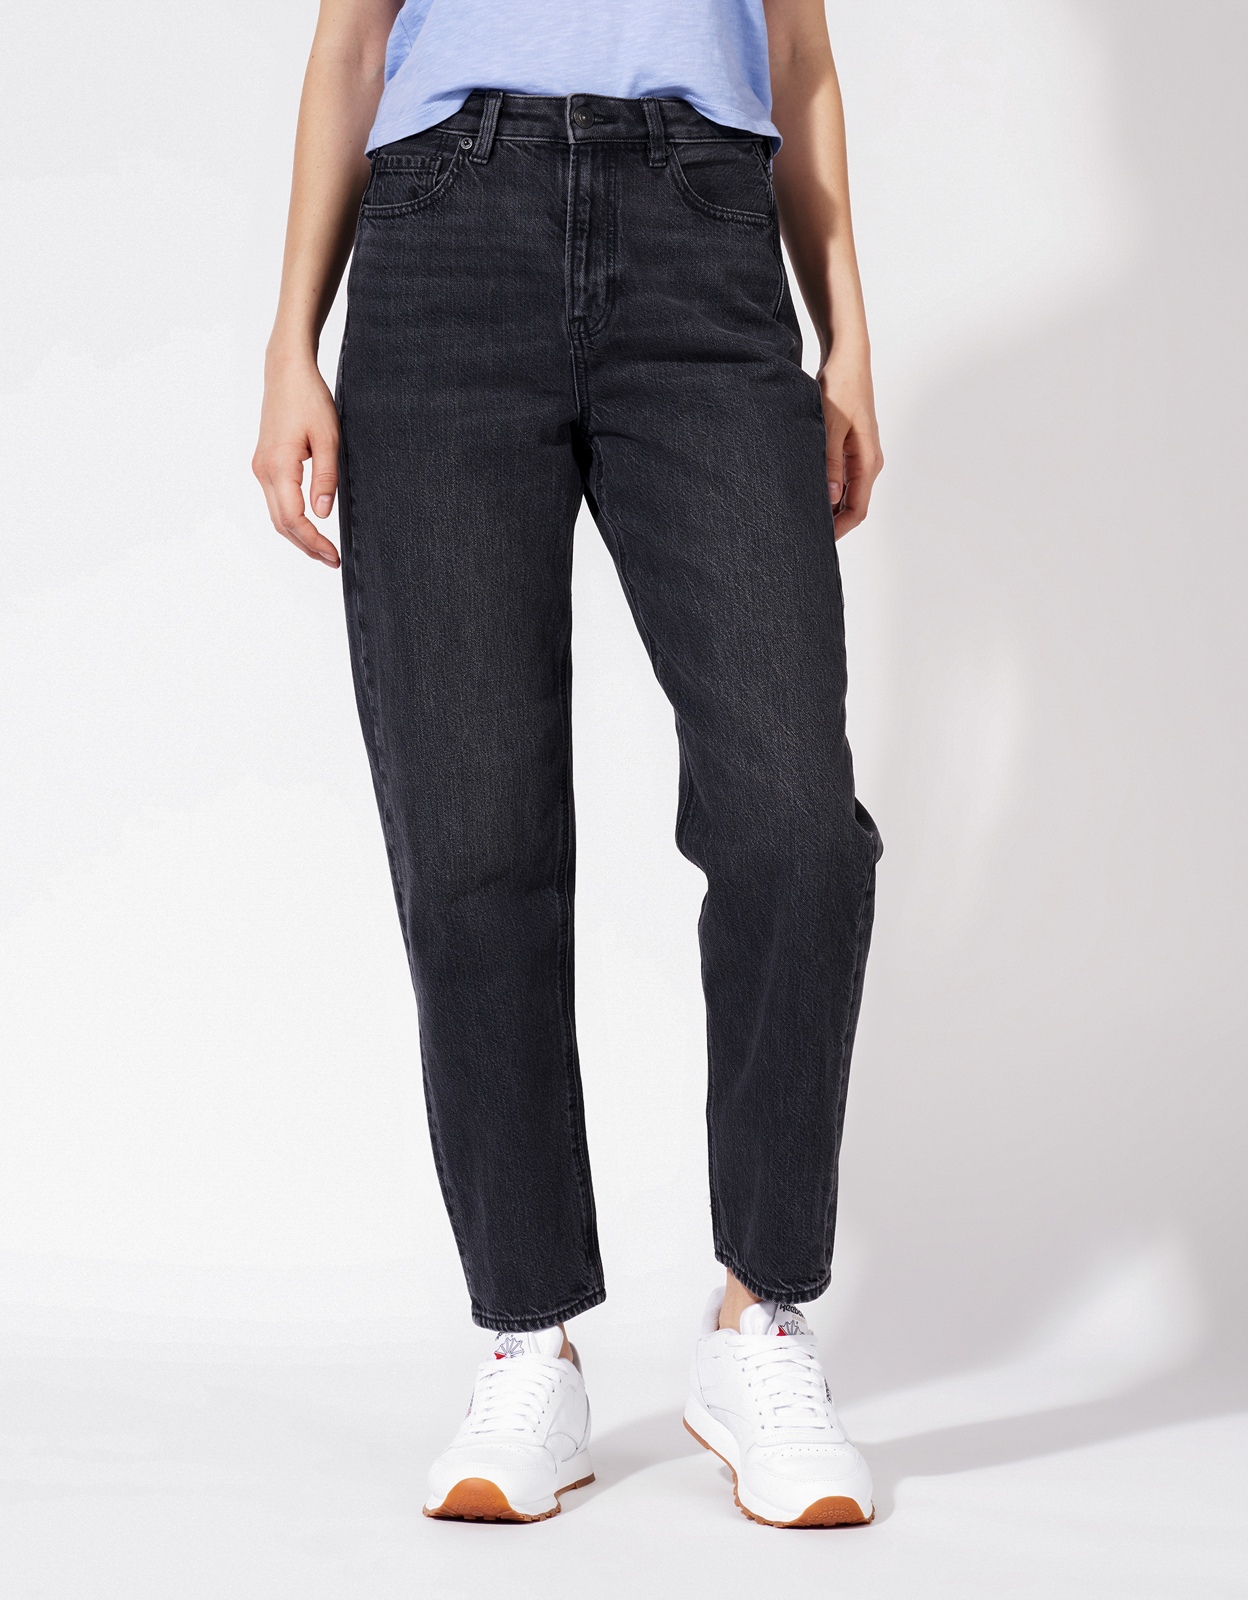 Shop AE Mom Straight Jean online | American Eagle Outfitters Kuwait